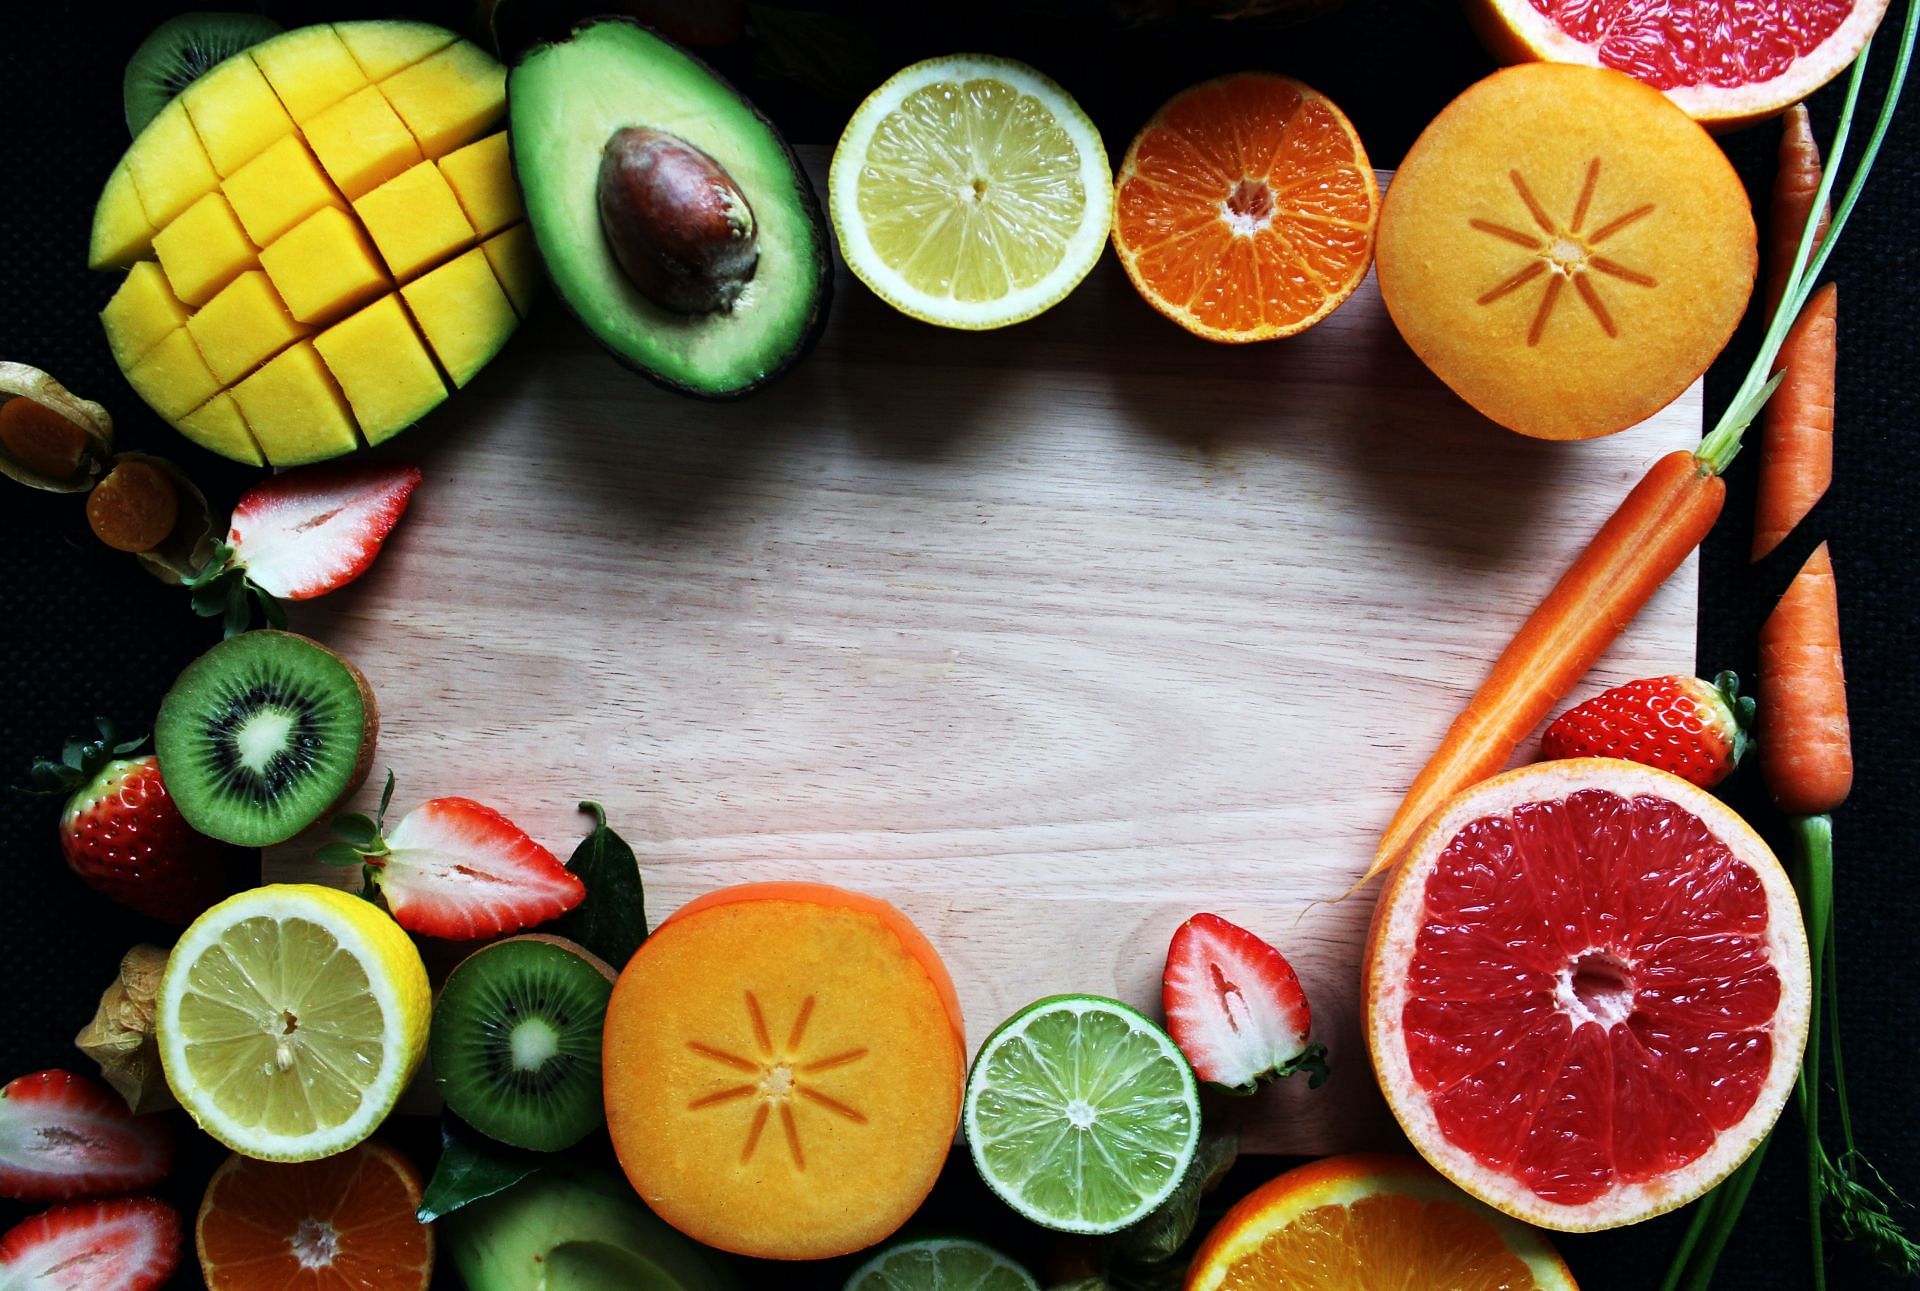 Fruits and vegetables are nutritious (Image via Unsplash/Amoon Ra)